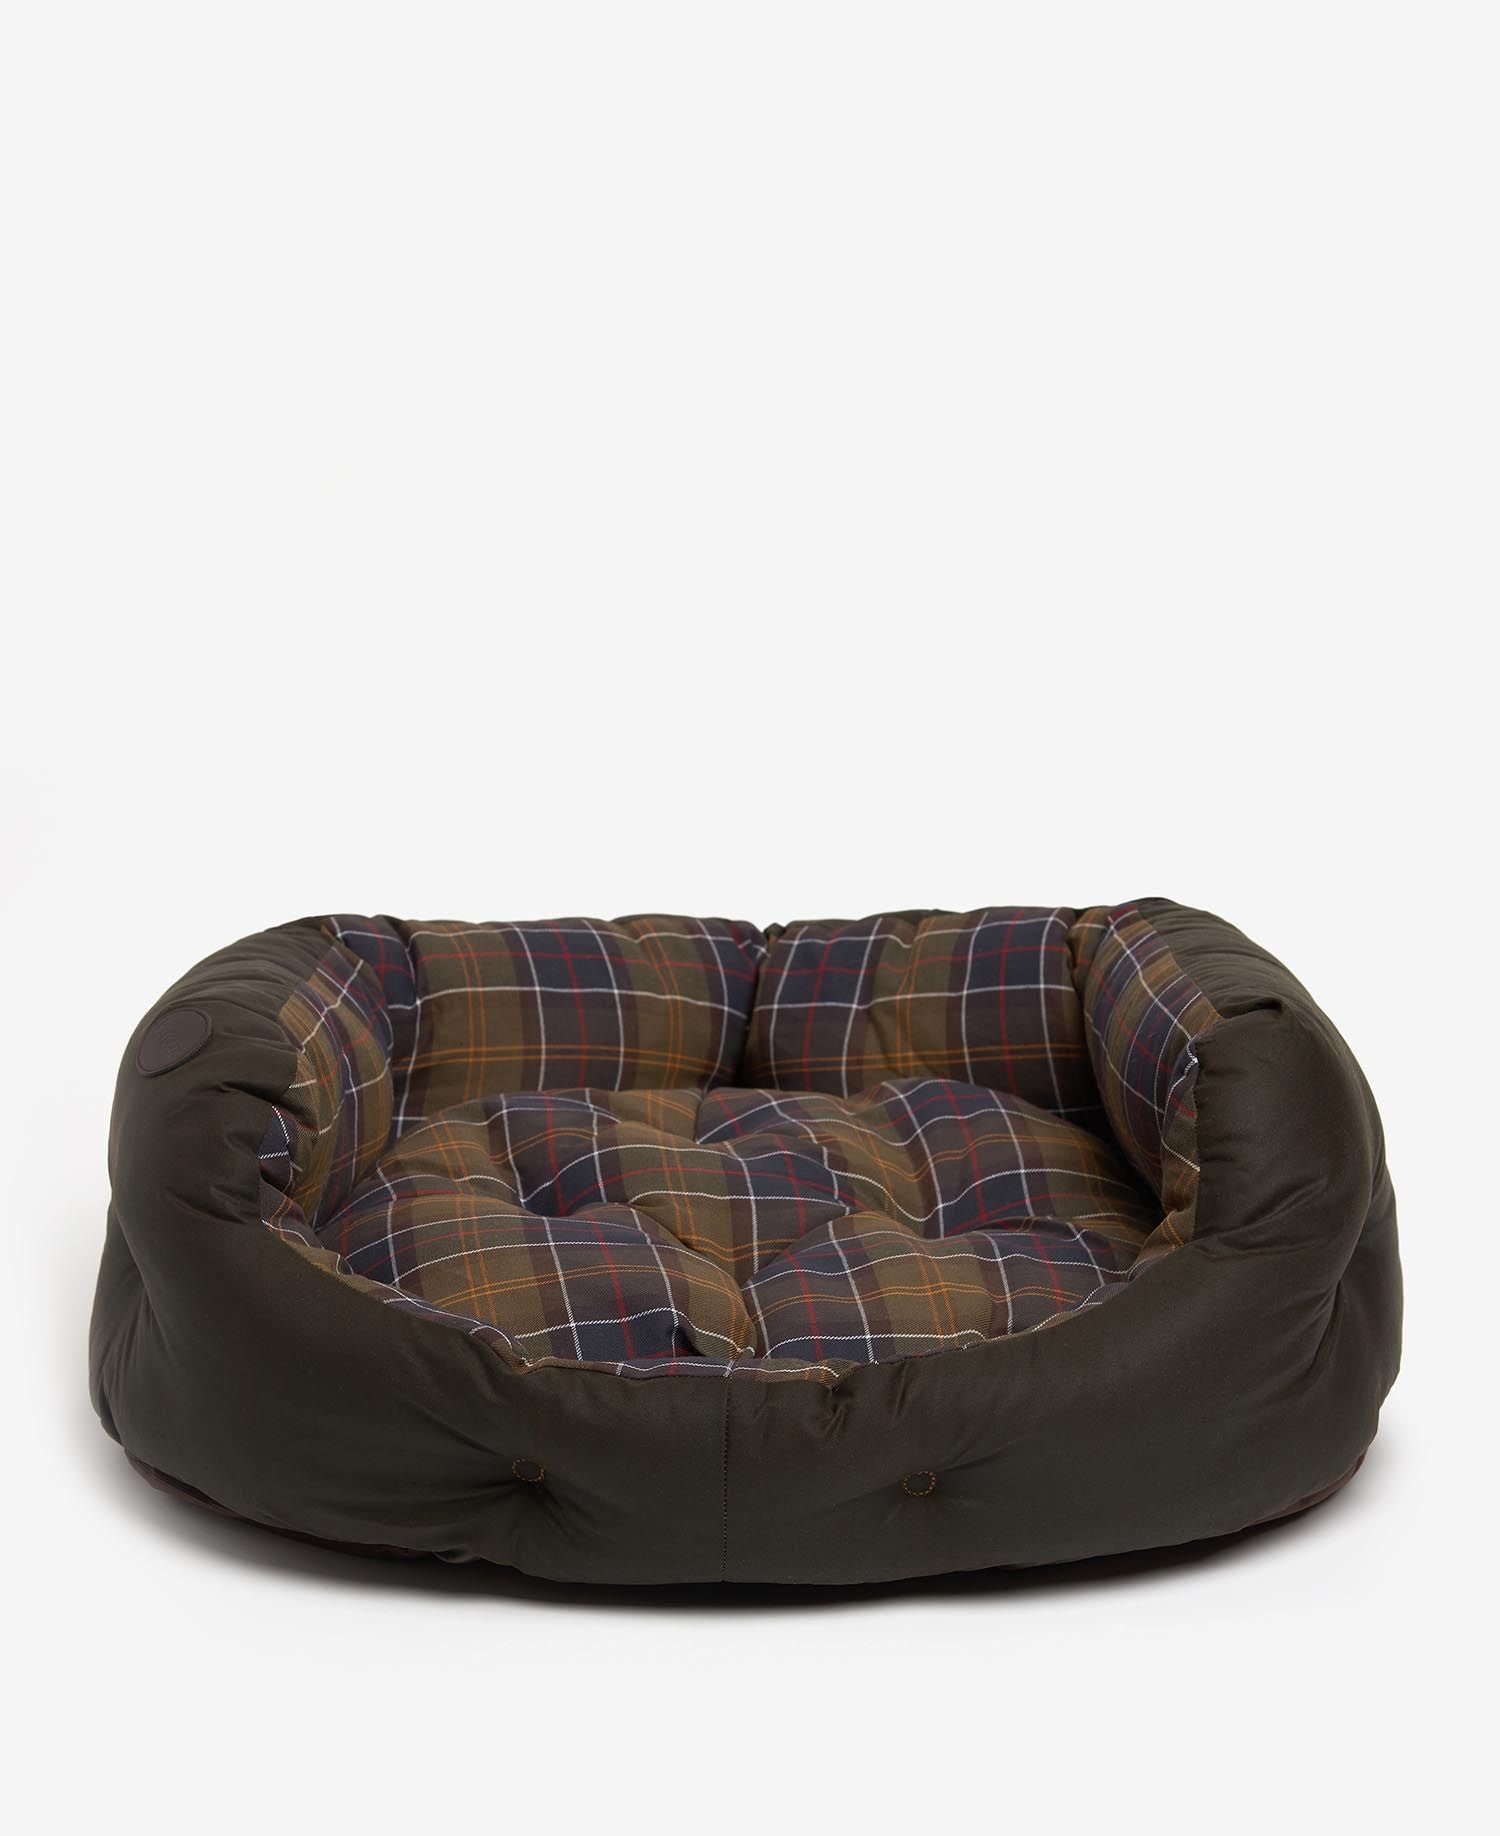 BARBOUR WAX/COTTON DOG BED 30 inch